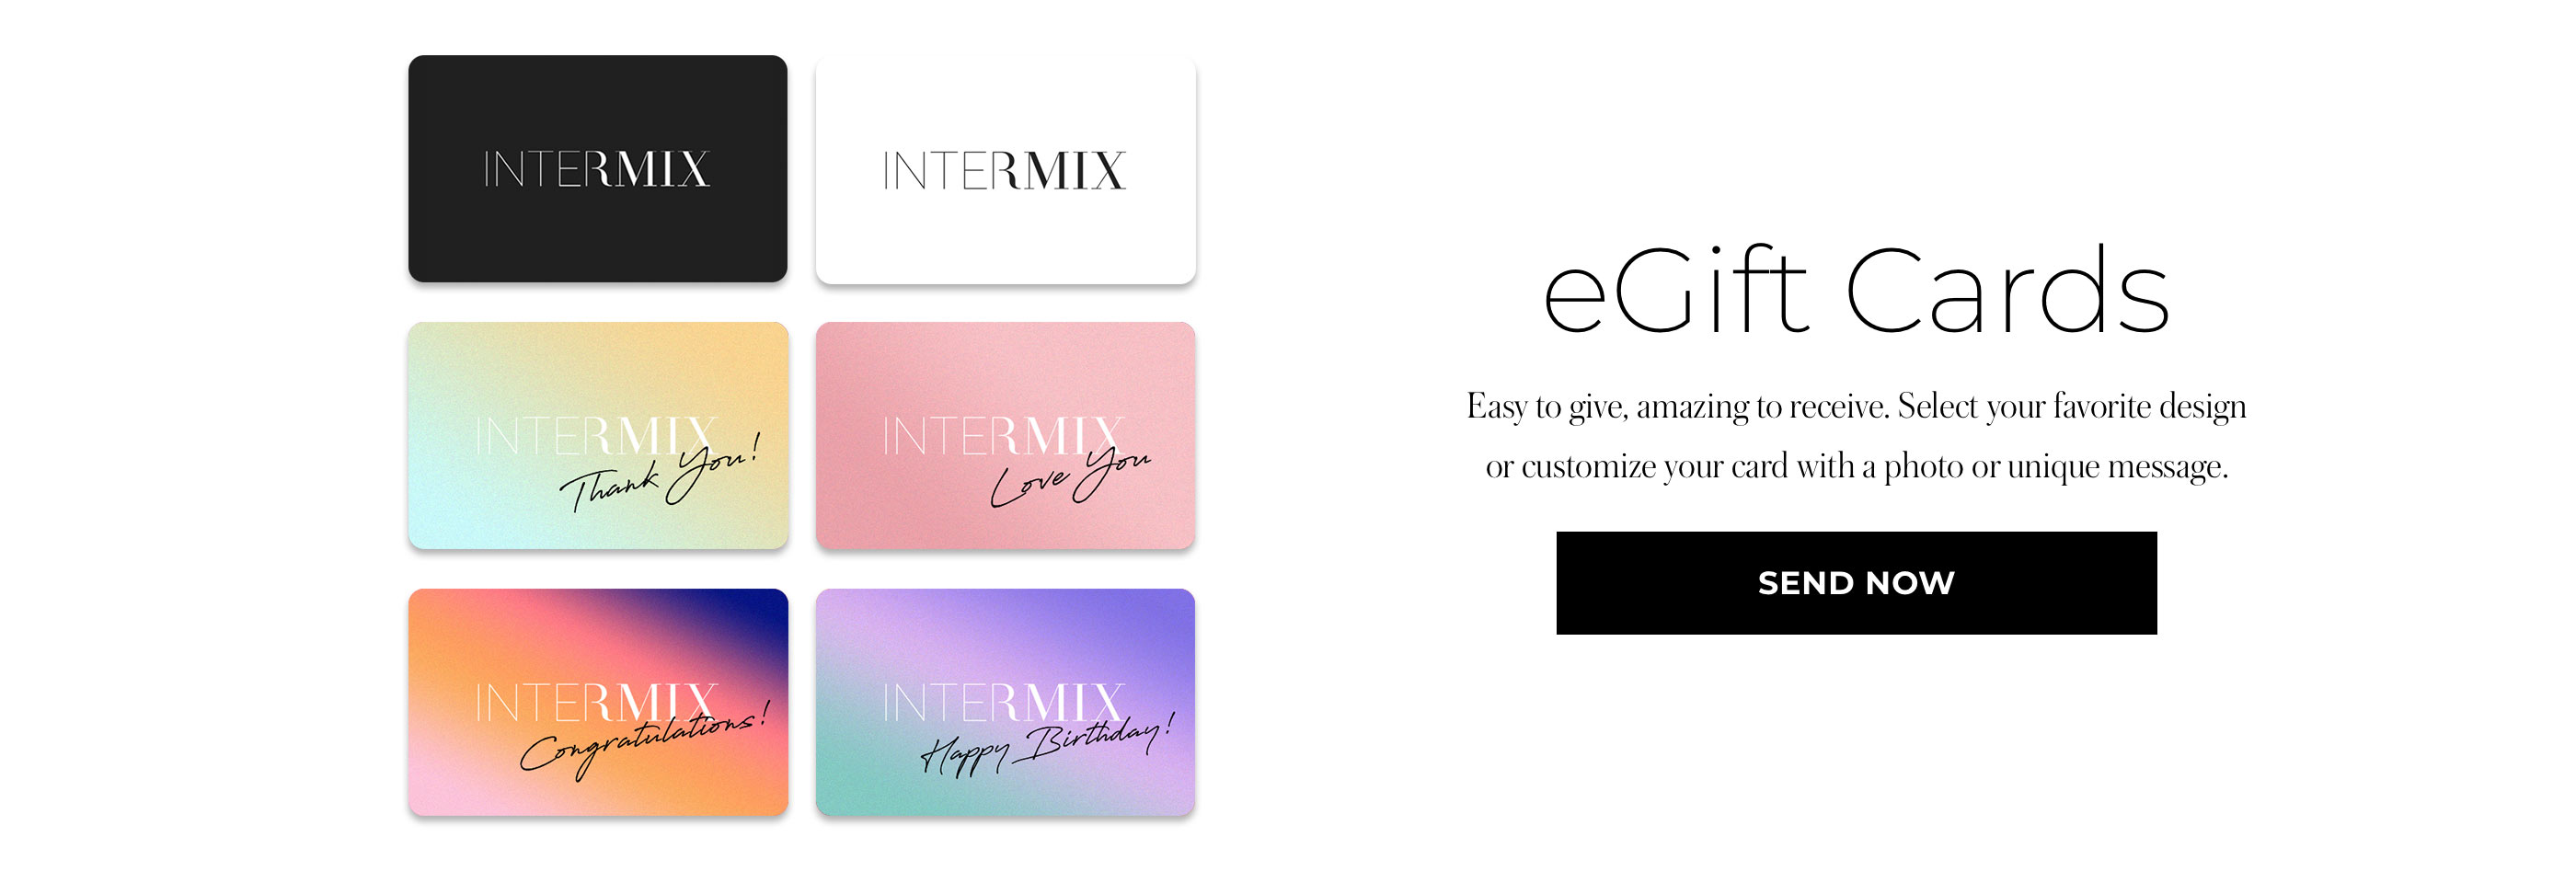 "eGift Cards Easy to give, amazing to receive. Select your favorite design or customize your card with a photo or unique message"